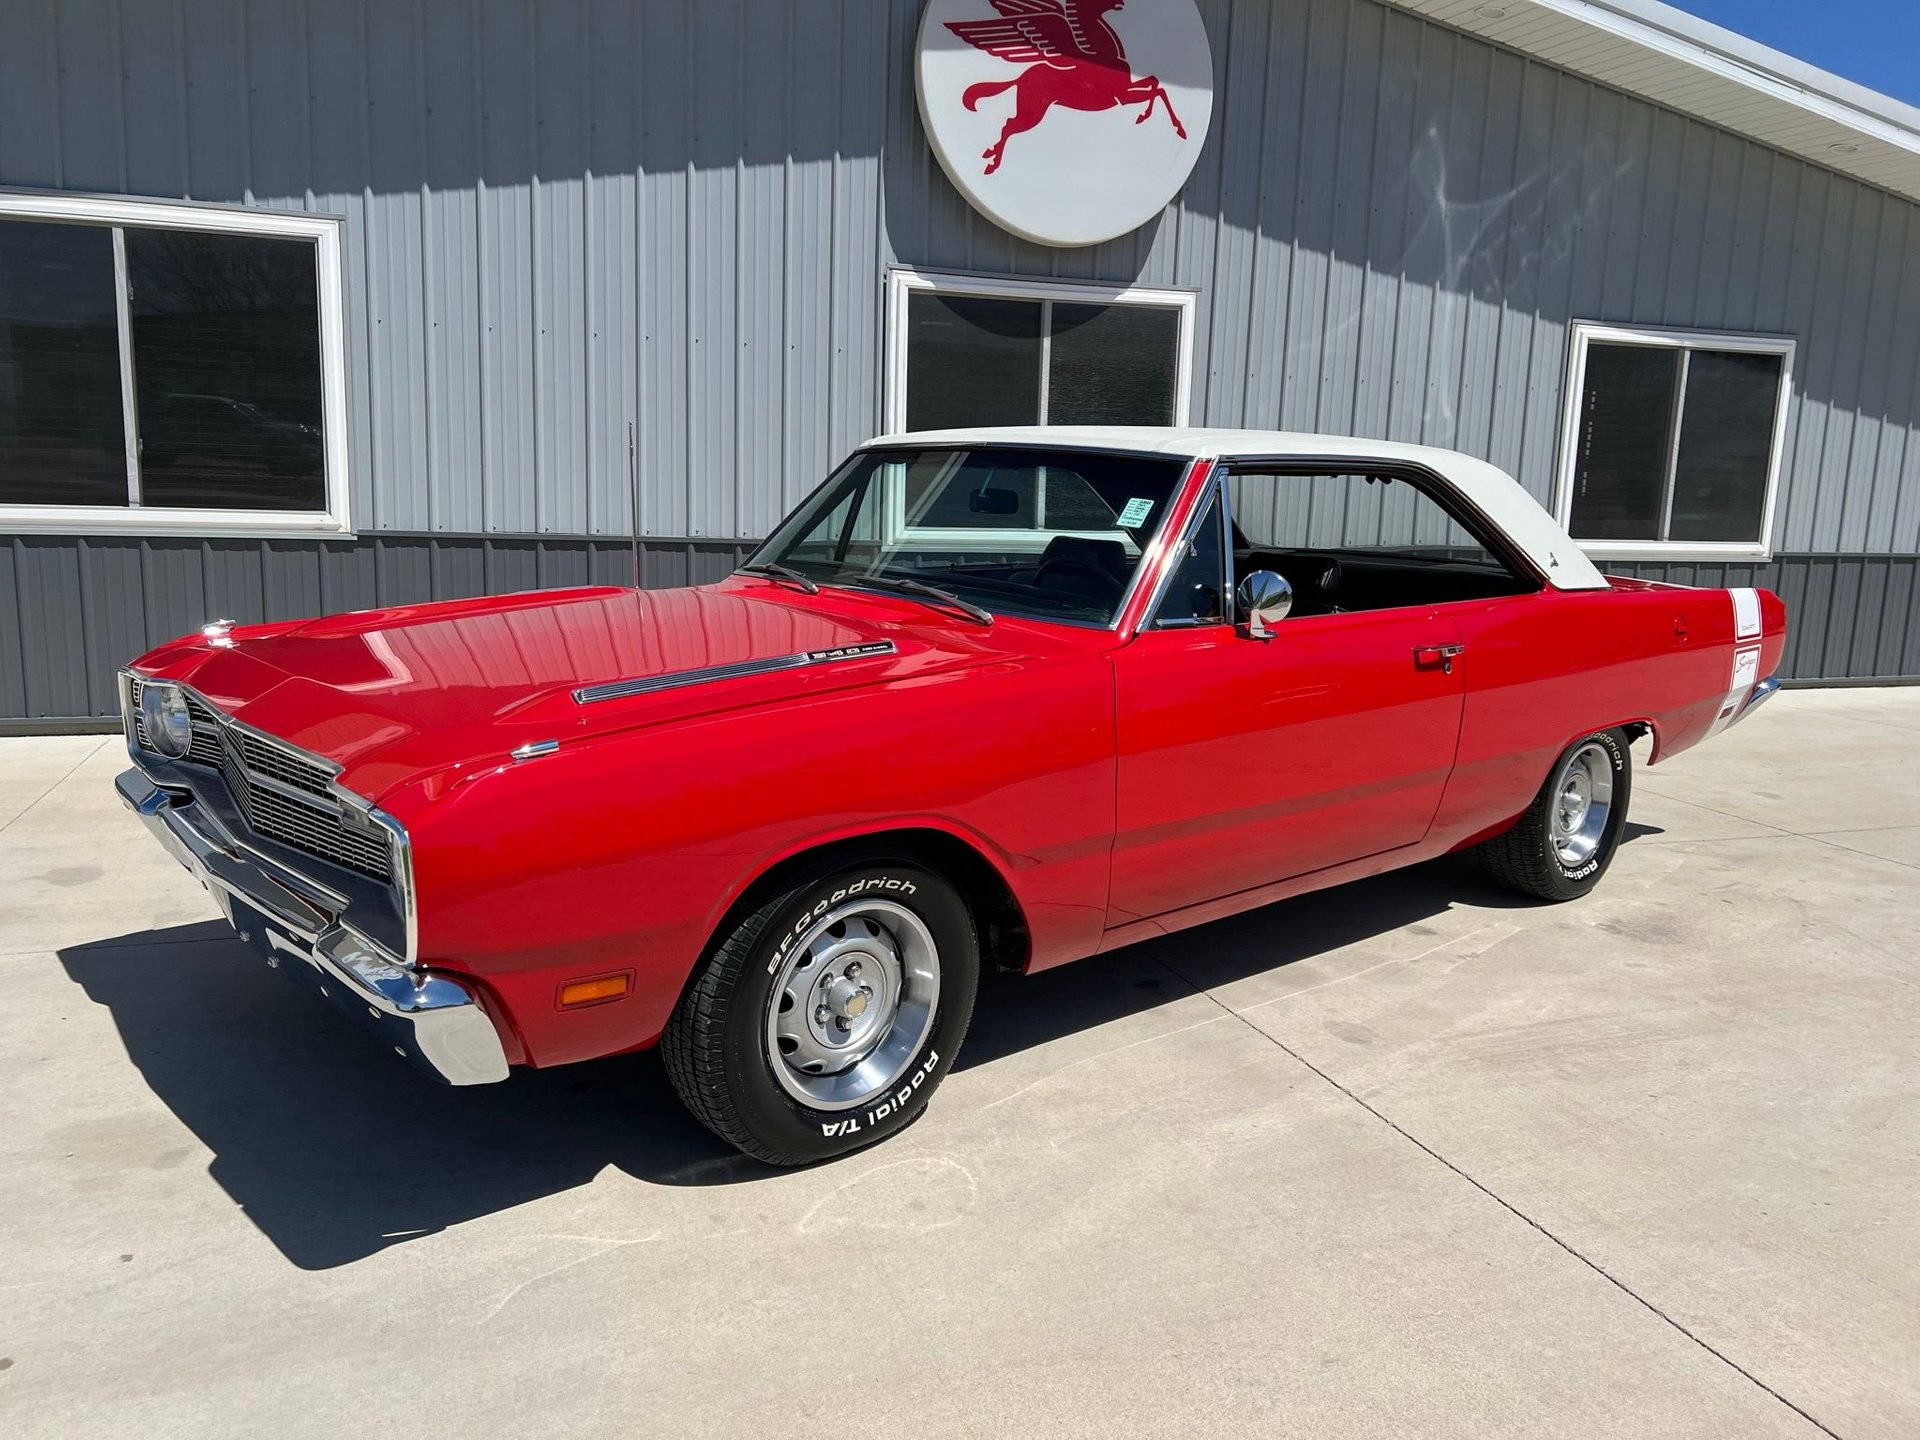 1969 Dodge Dart Swinger Sold Motorious picture photo